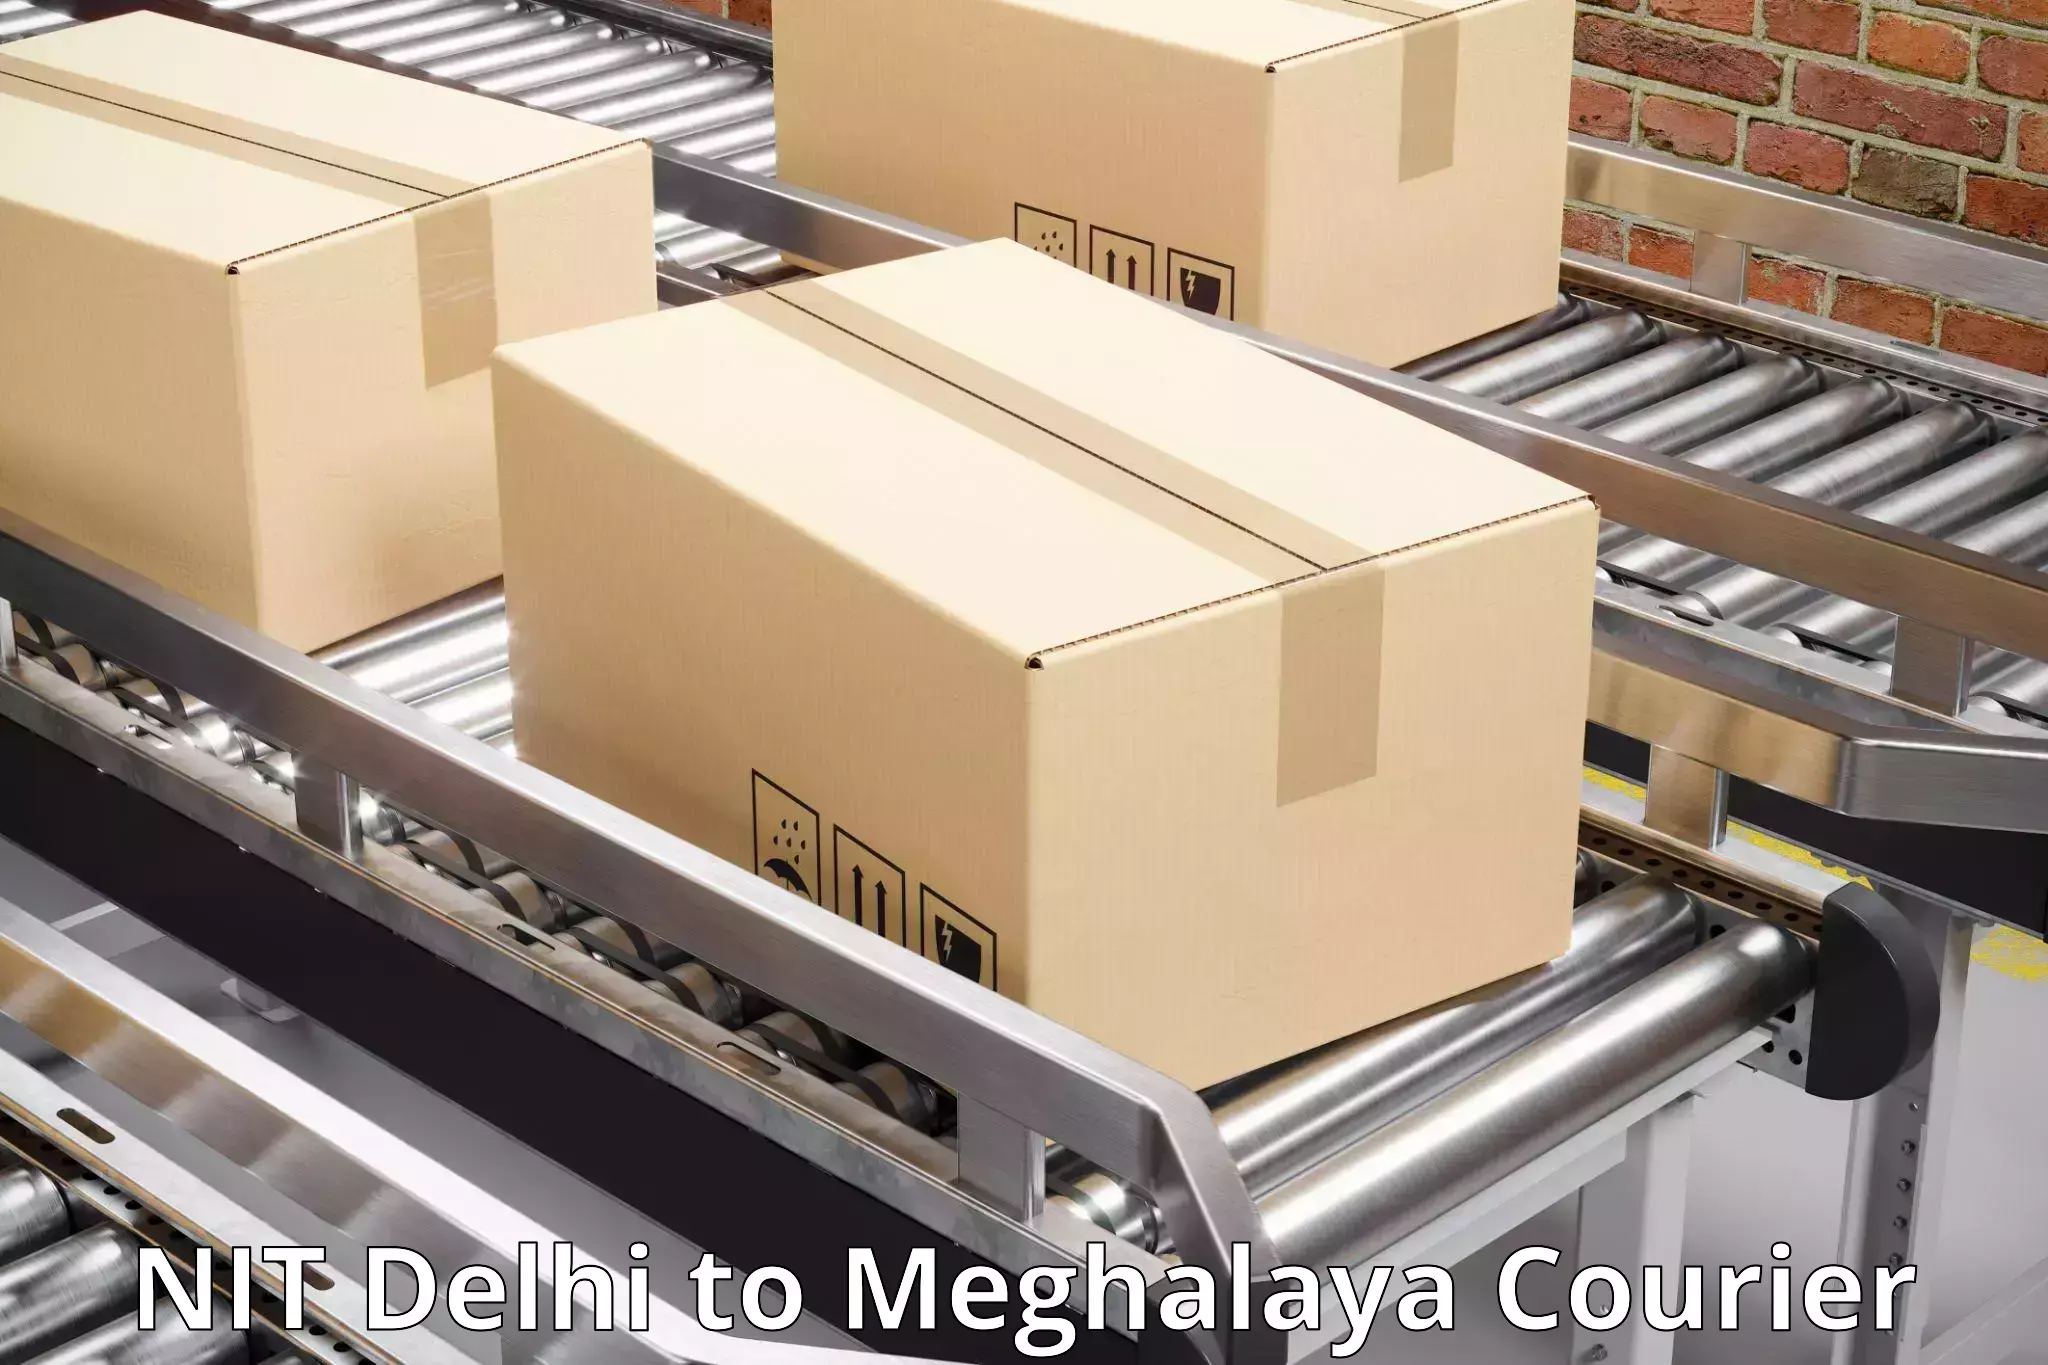 State-of-the-art courier technology NIT Delhi to Tikrikilla